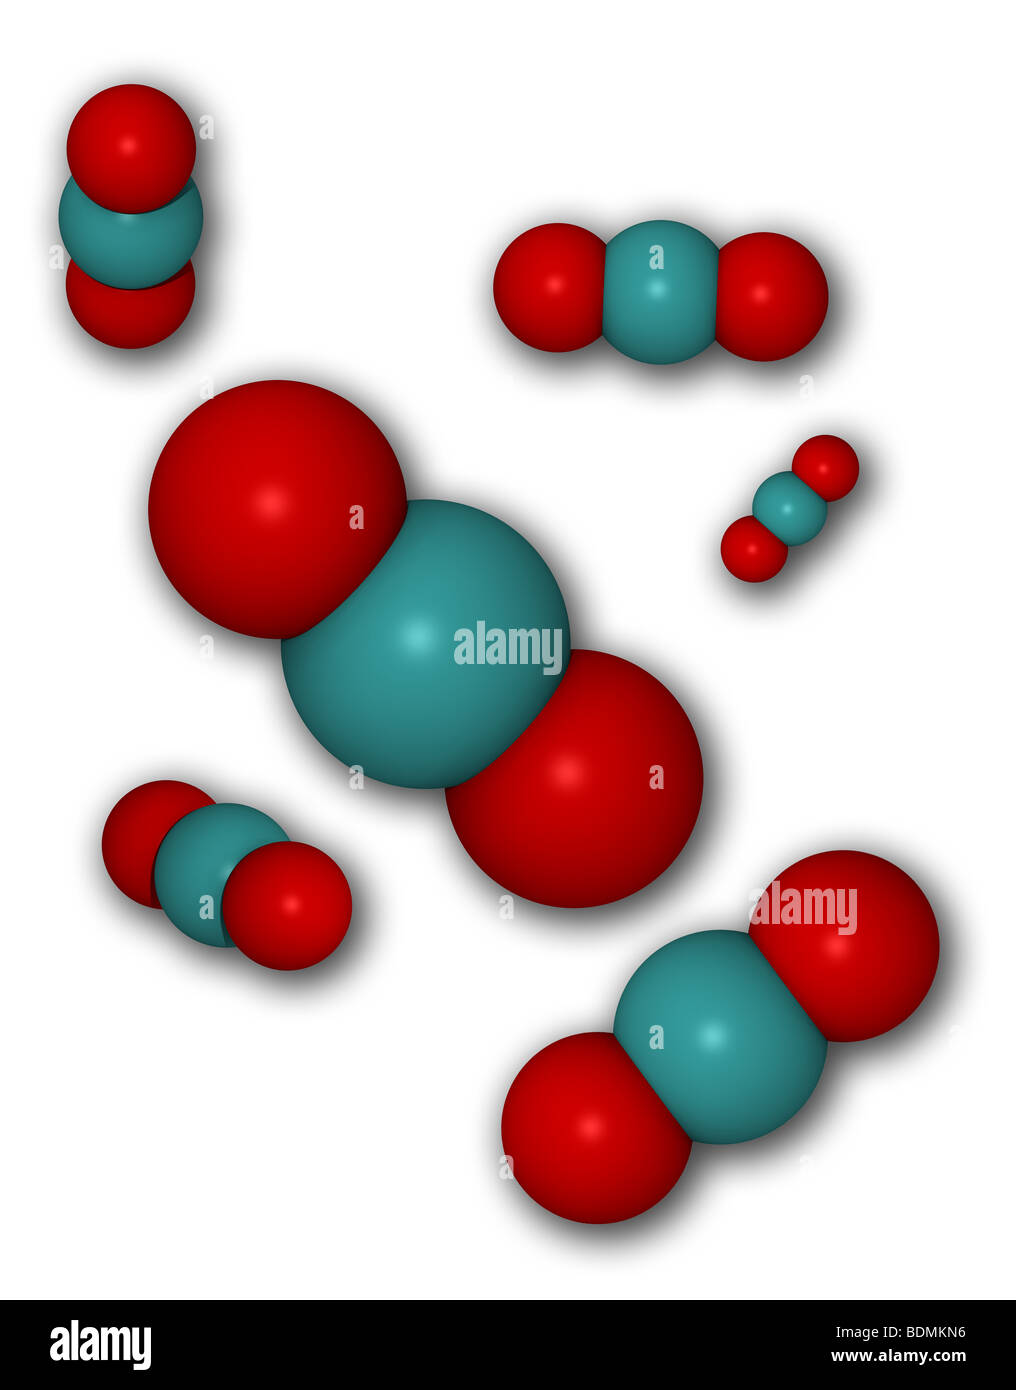 Molecular model of carbon dioxide molecules, one of the greenhouse gases Stock Photo